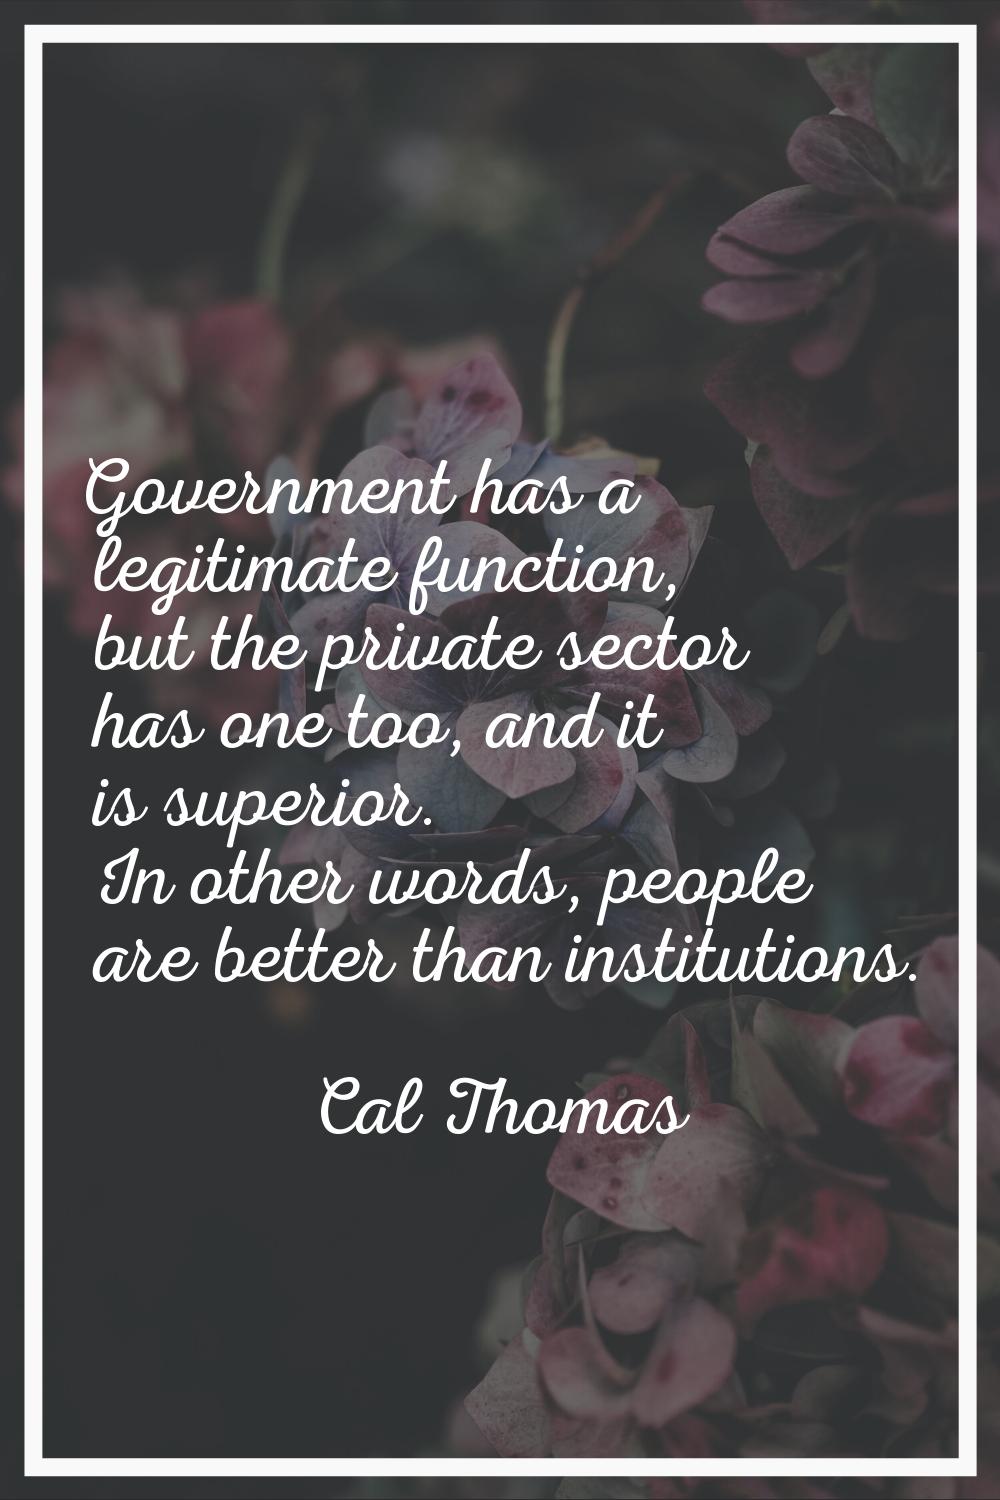 Government has a legitimate function, but the private sector has one too, and it is superior. In ot